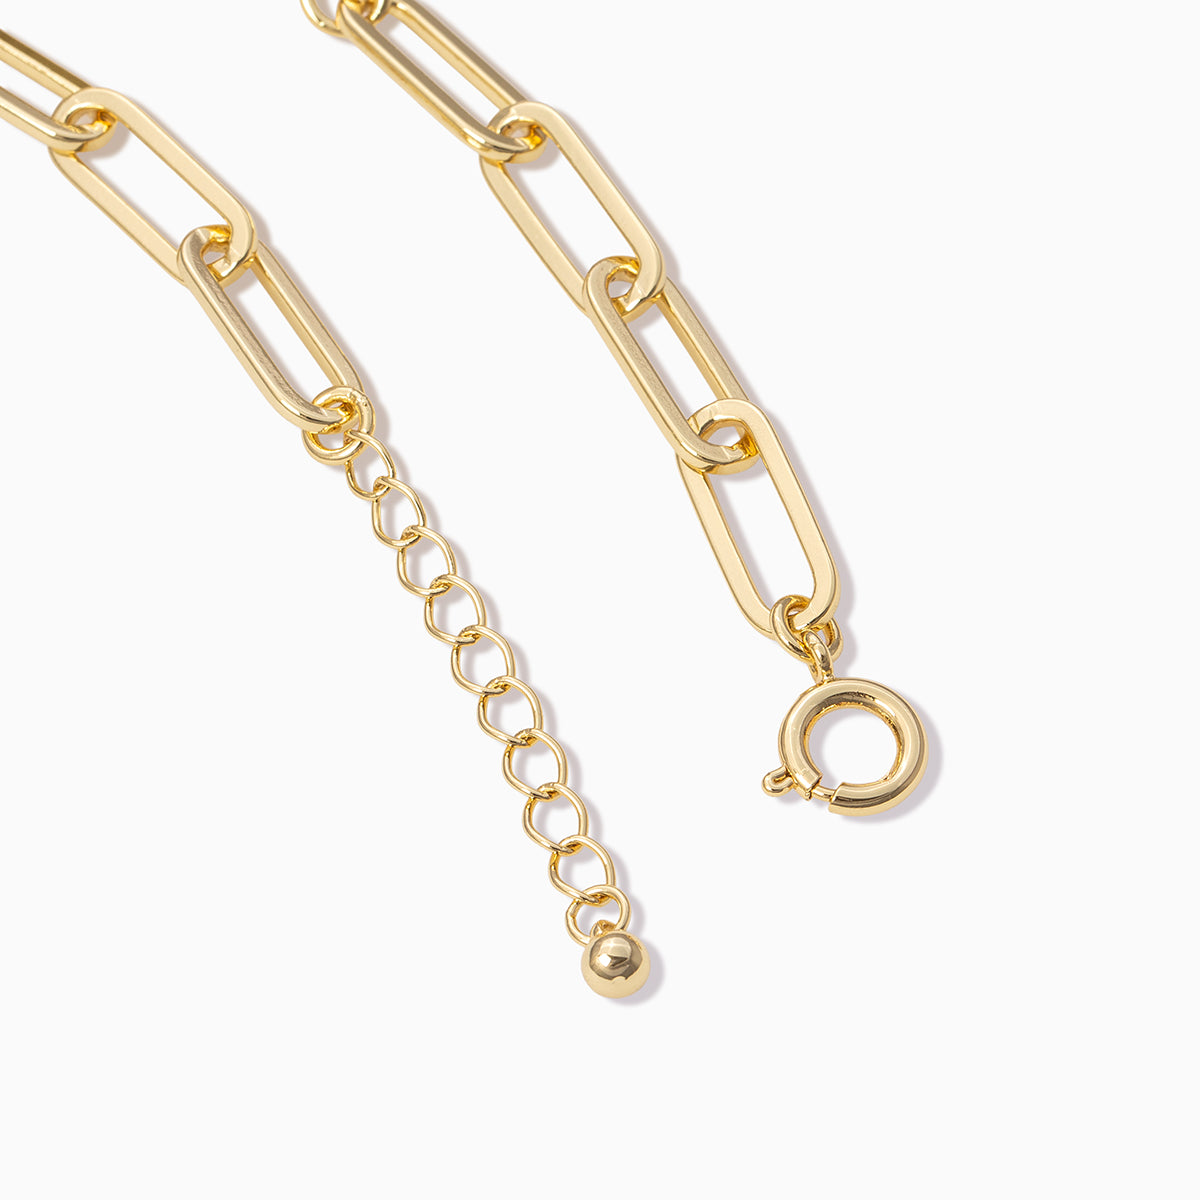 Gold Paperclip Chain Charm Bracelet | Charm Jewelry | Women's Jewelry by Uncommon James